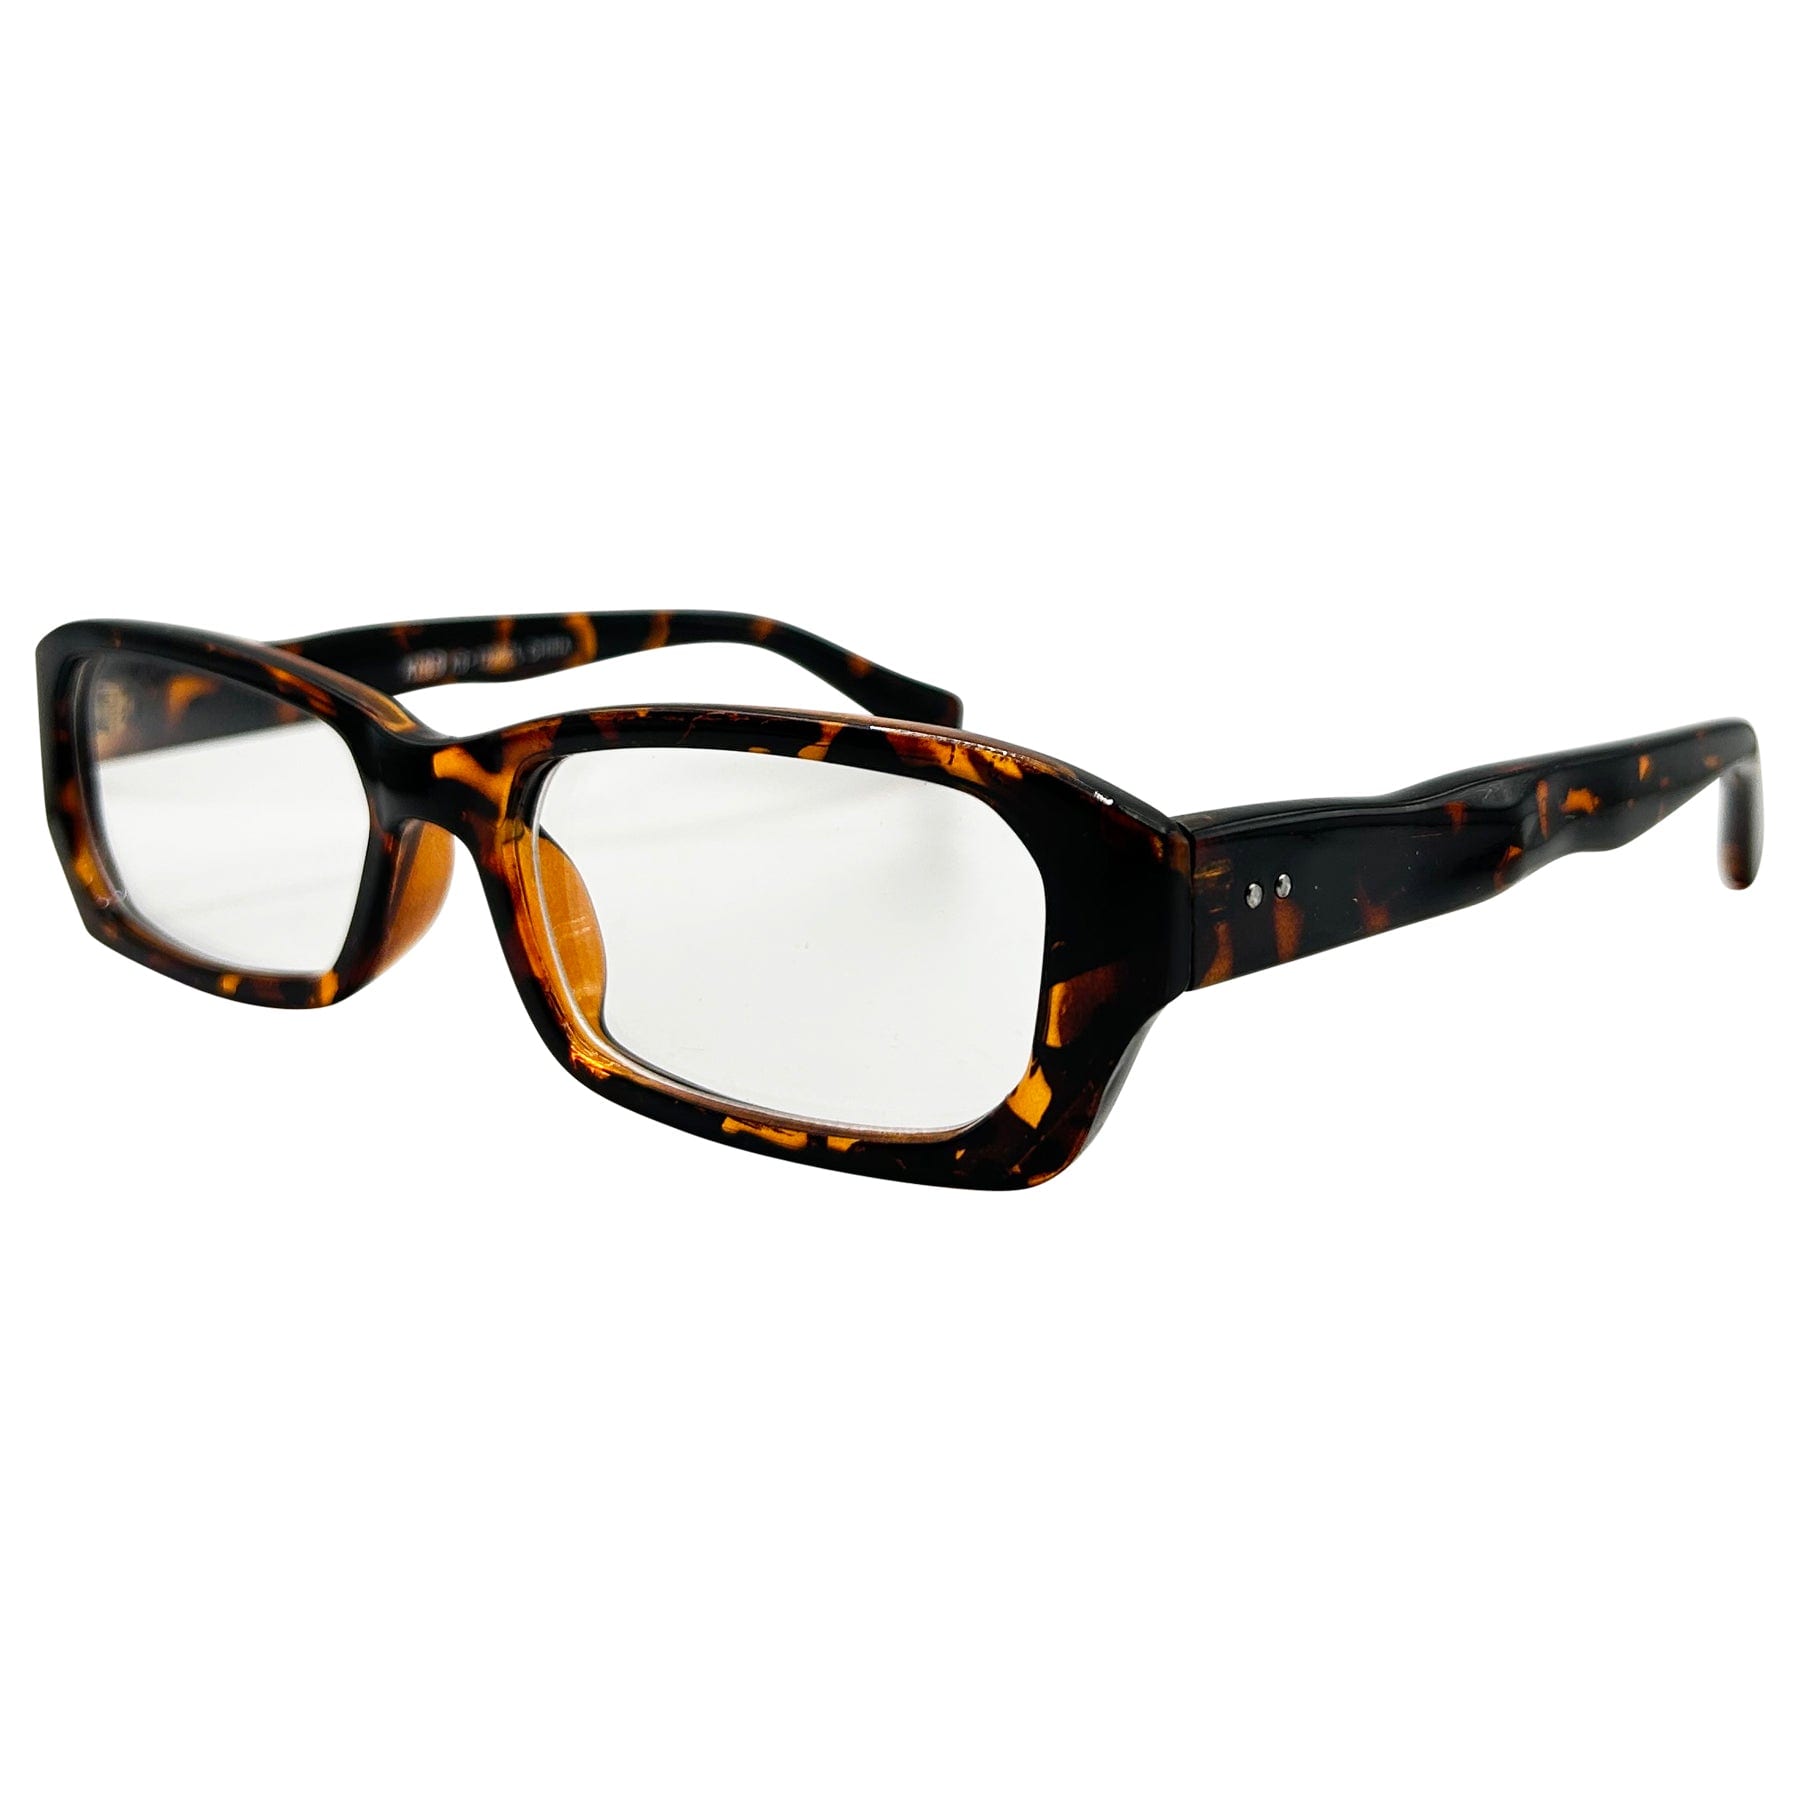 tortoise shell sunglasses with a retro 90s style frame